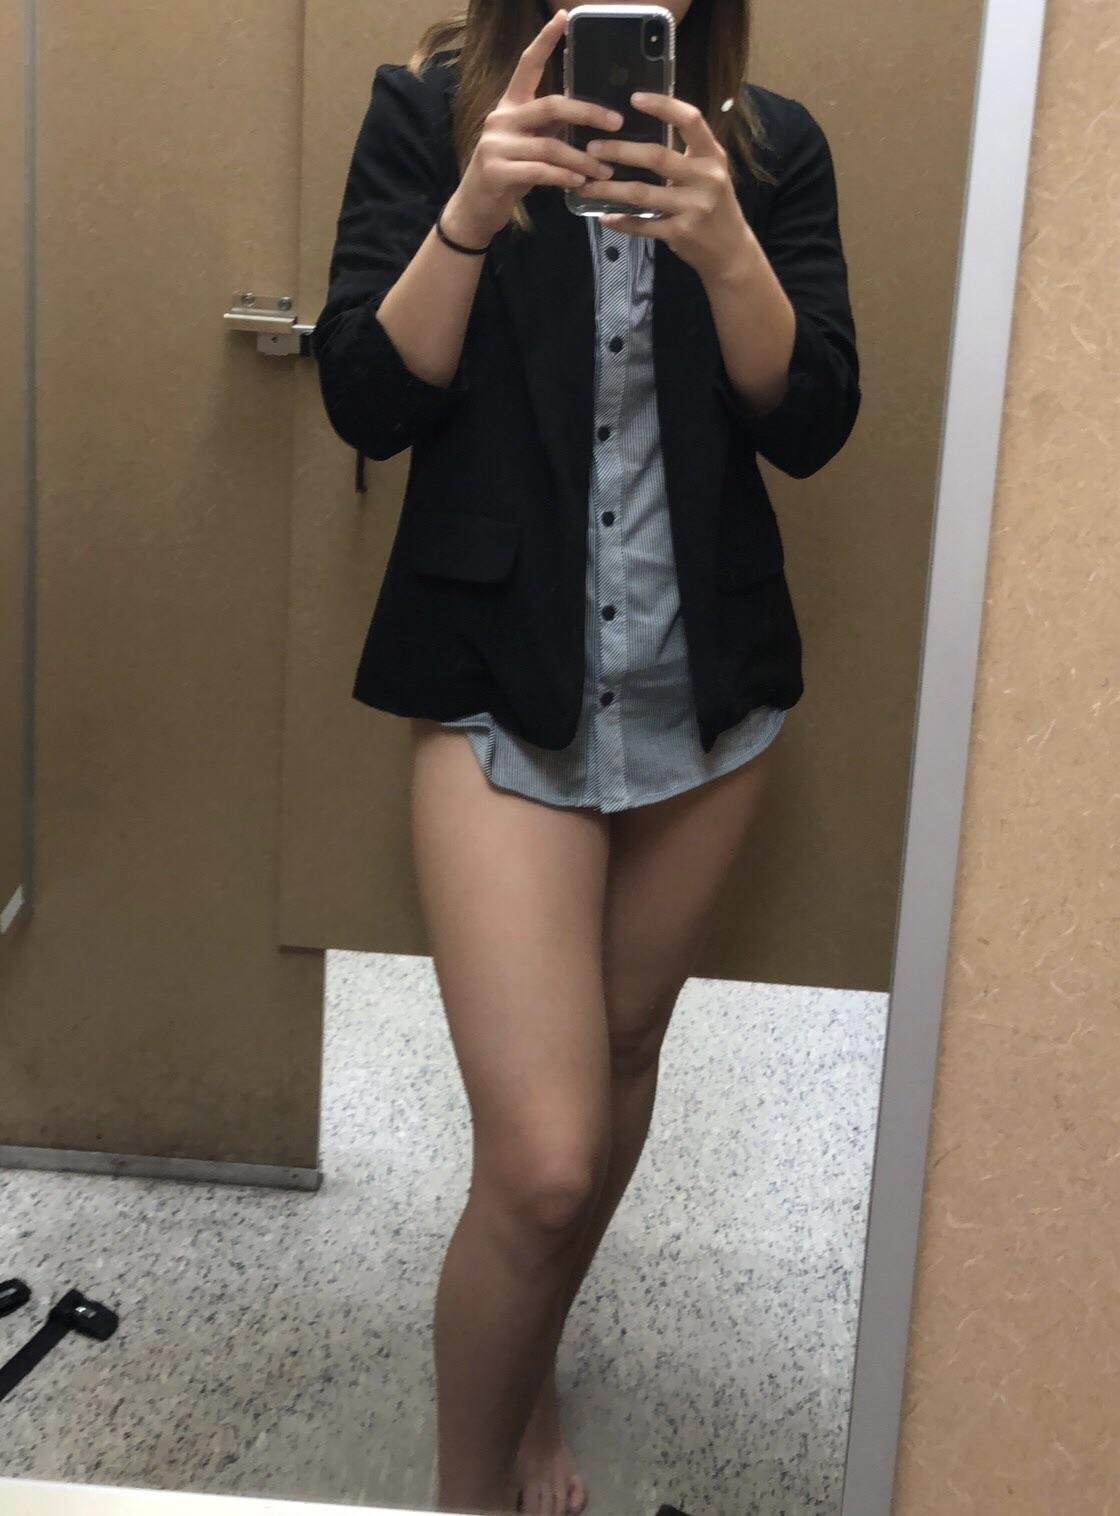 trying on clothes (f)or a job interview